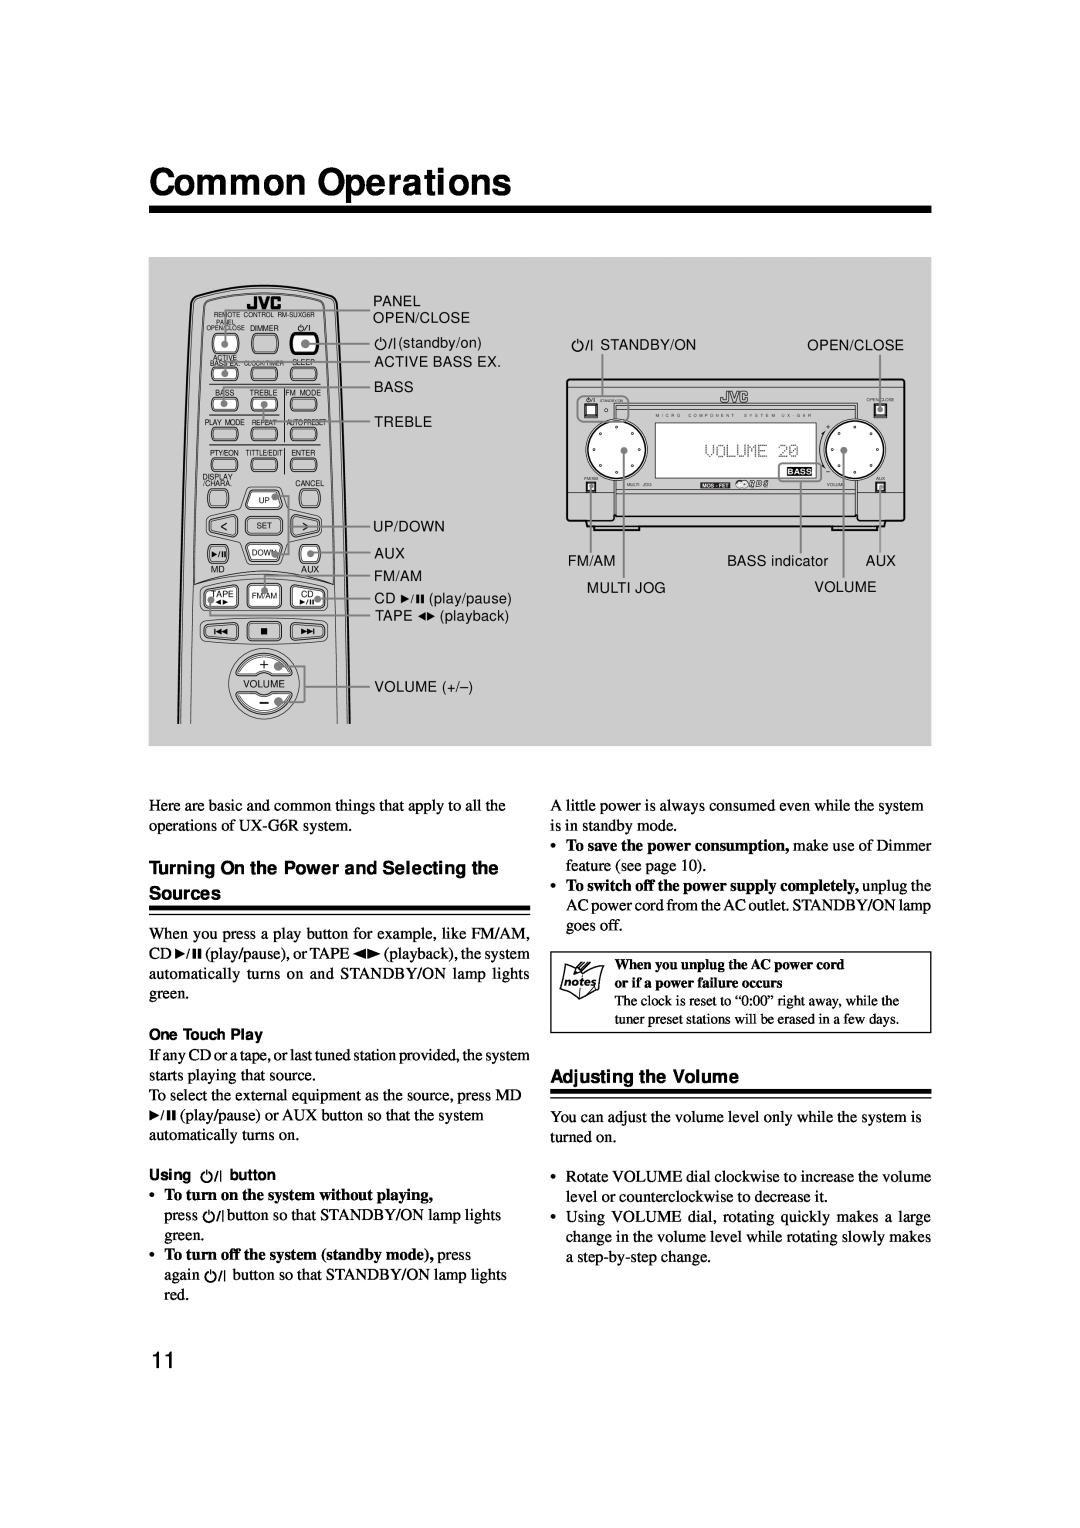 JVC TD-UXG6 manual Common Operations, Turning On the Power and Selecting the Sources, Adjusting the Volume, One Touch Play 